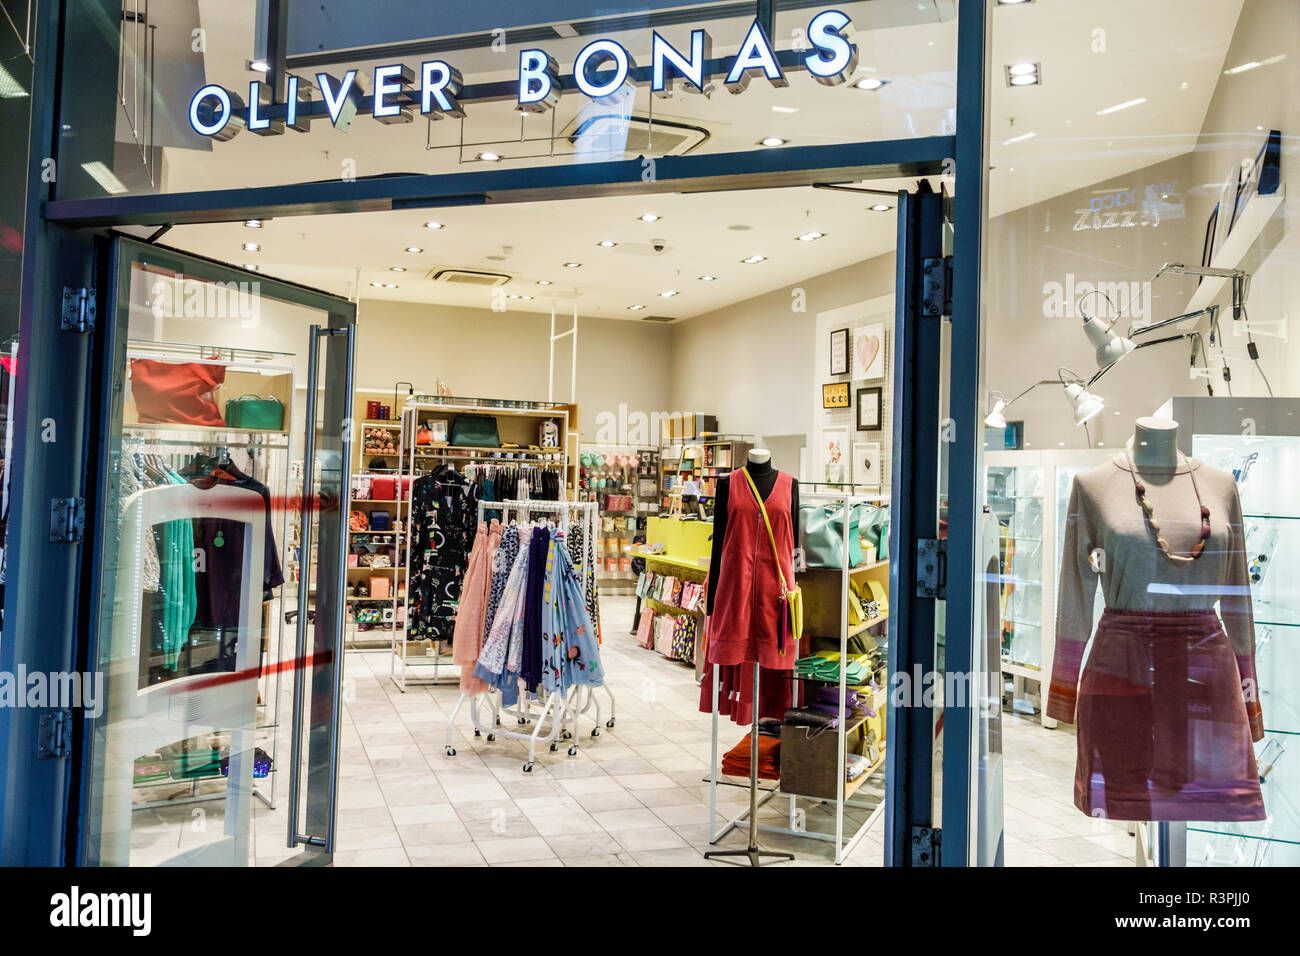 City of London England,UK One New Change mall,centre center,Oliver Bonas,fashion boutique,store,women's clothing,entrance,mannequin,display sale,UK GB Stock Photo